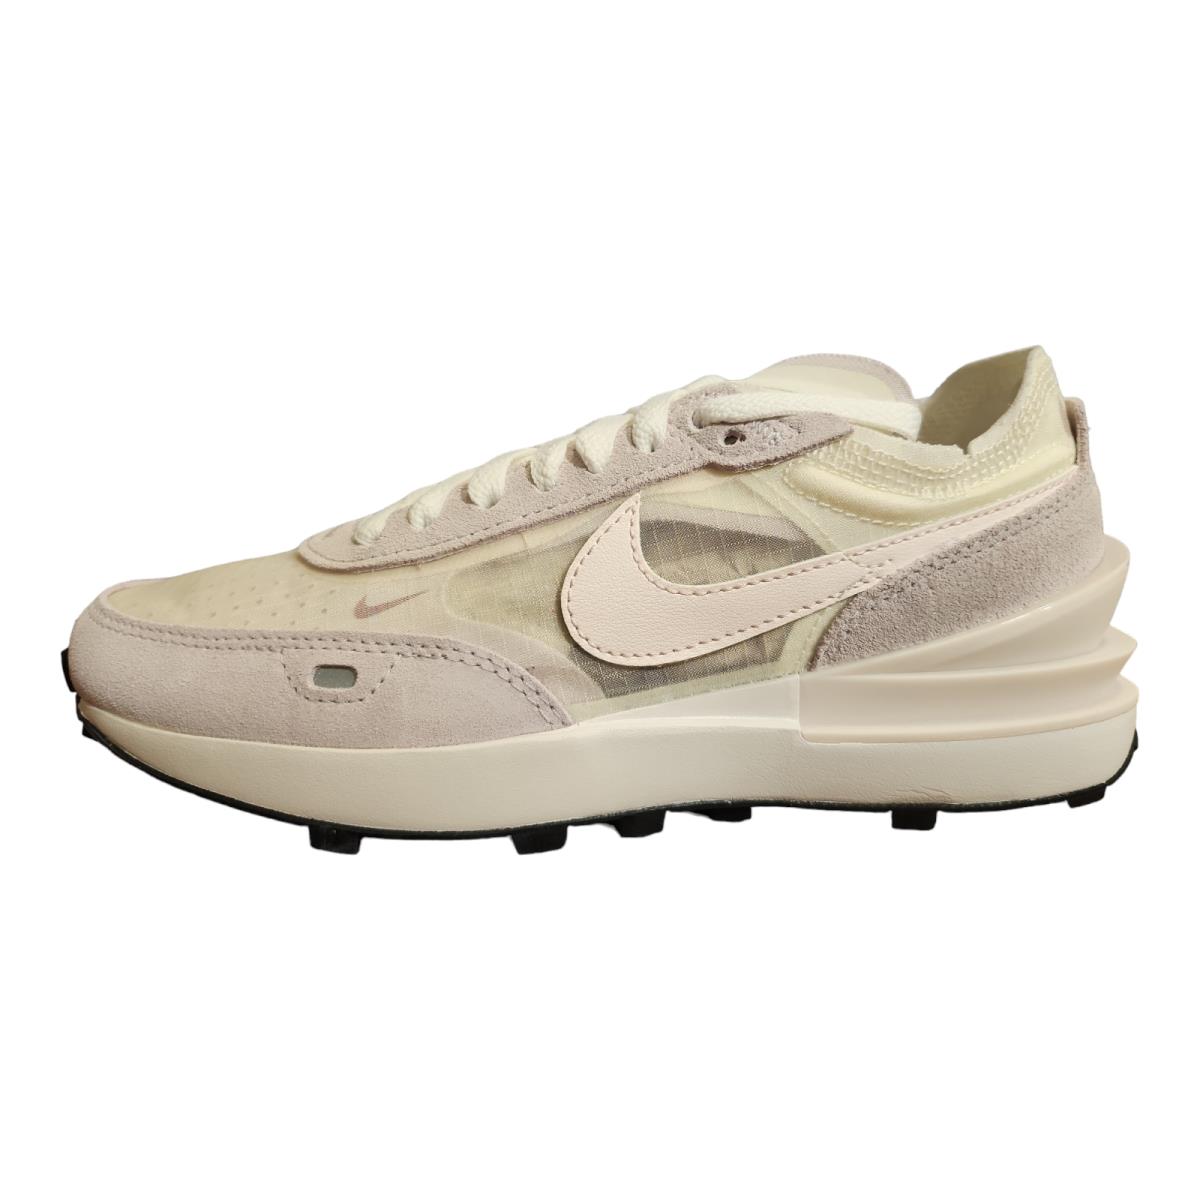 Nike Women`s Waffle One Sail/light Soft Pink Active Running Shoes DN4696 100 - Sail/Light Soft Pink